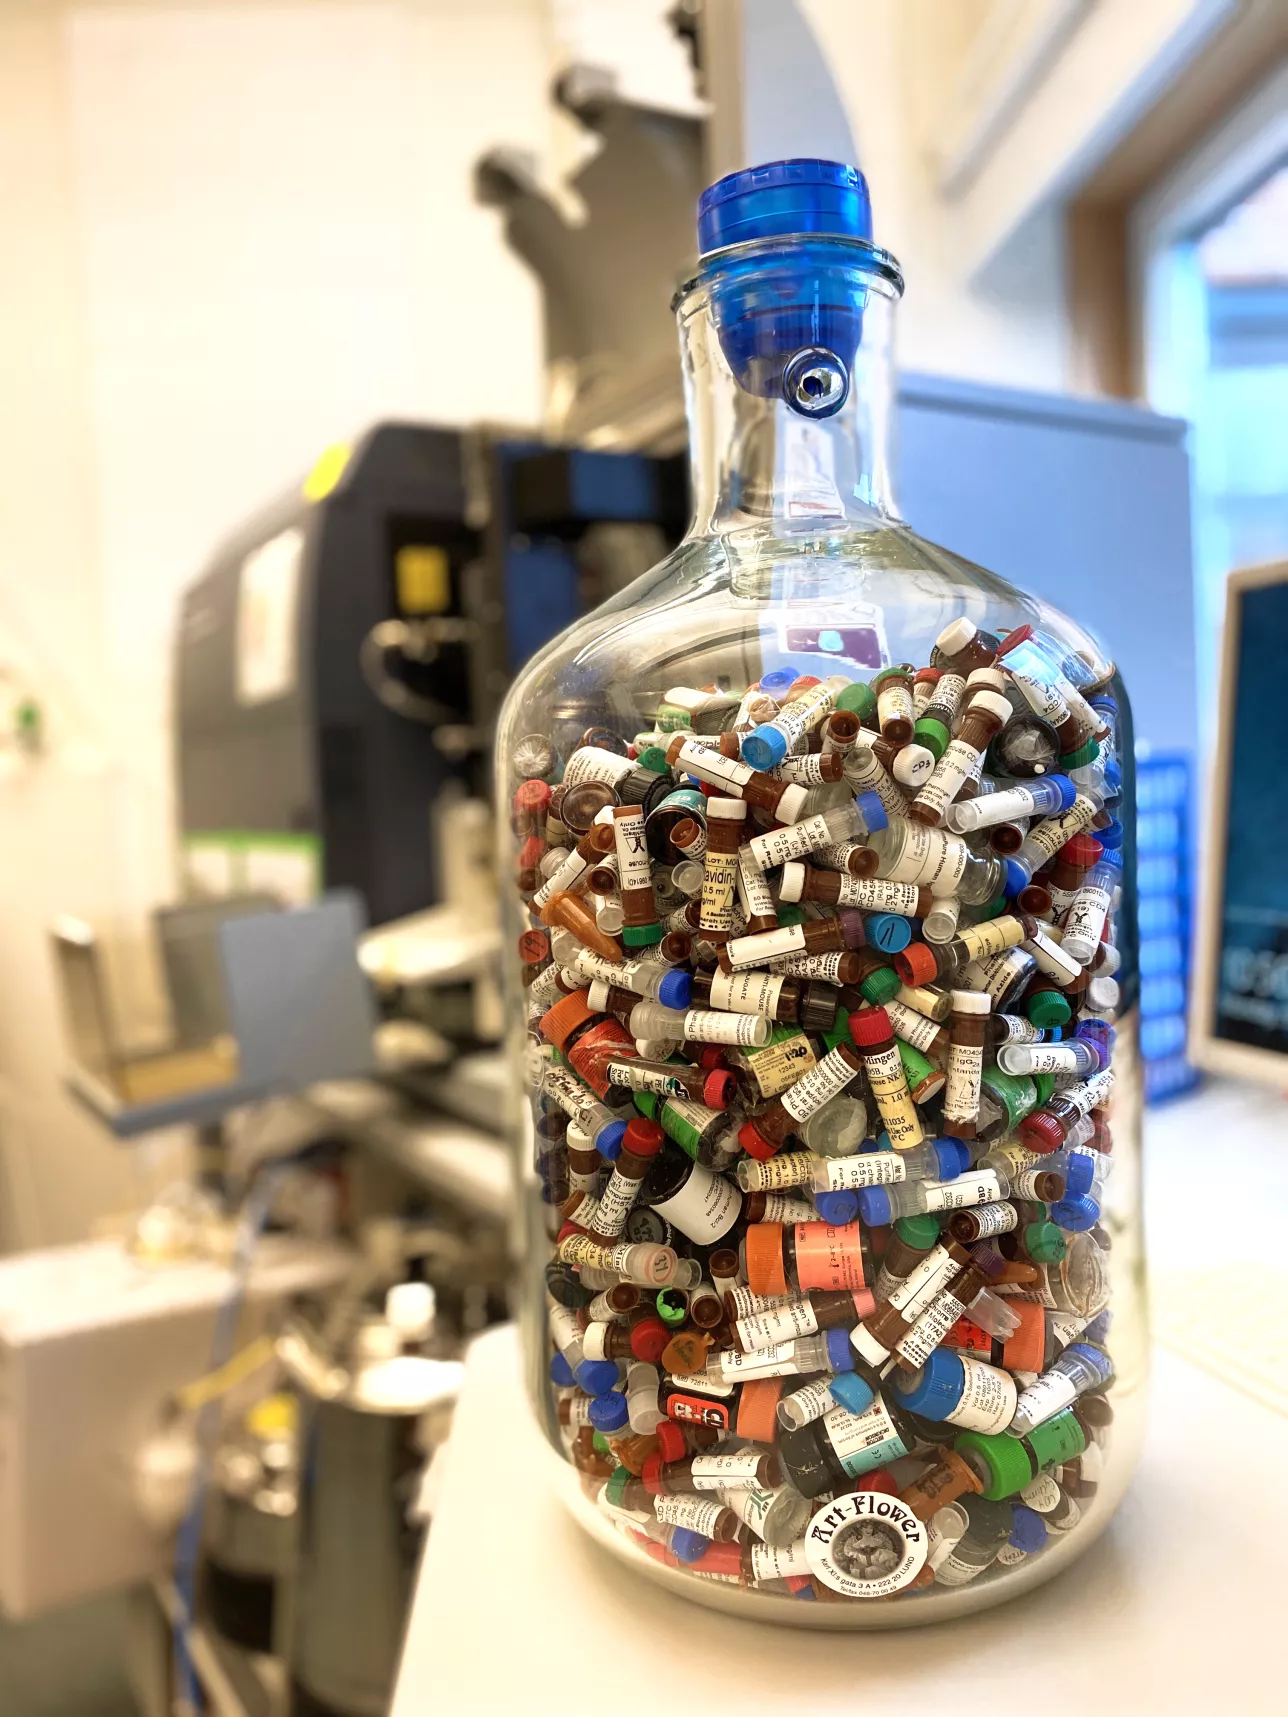 Image of a collection of sample tubes in a large jar.